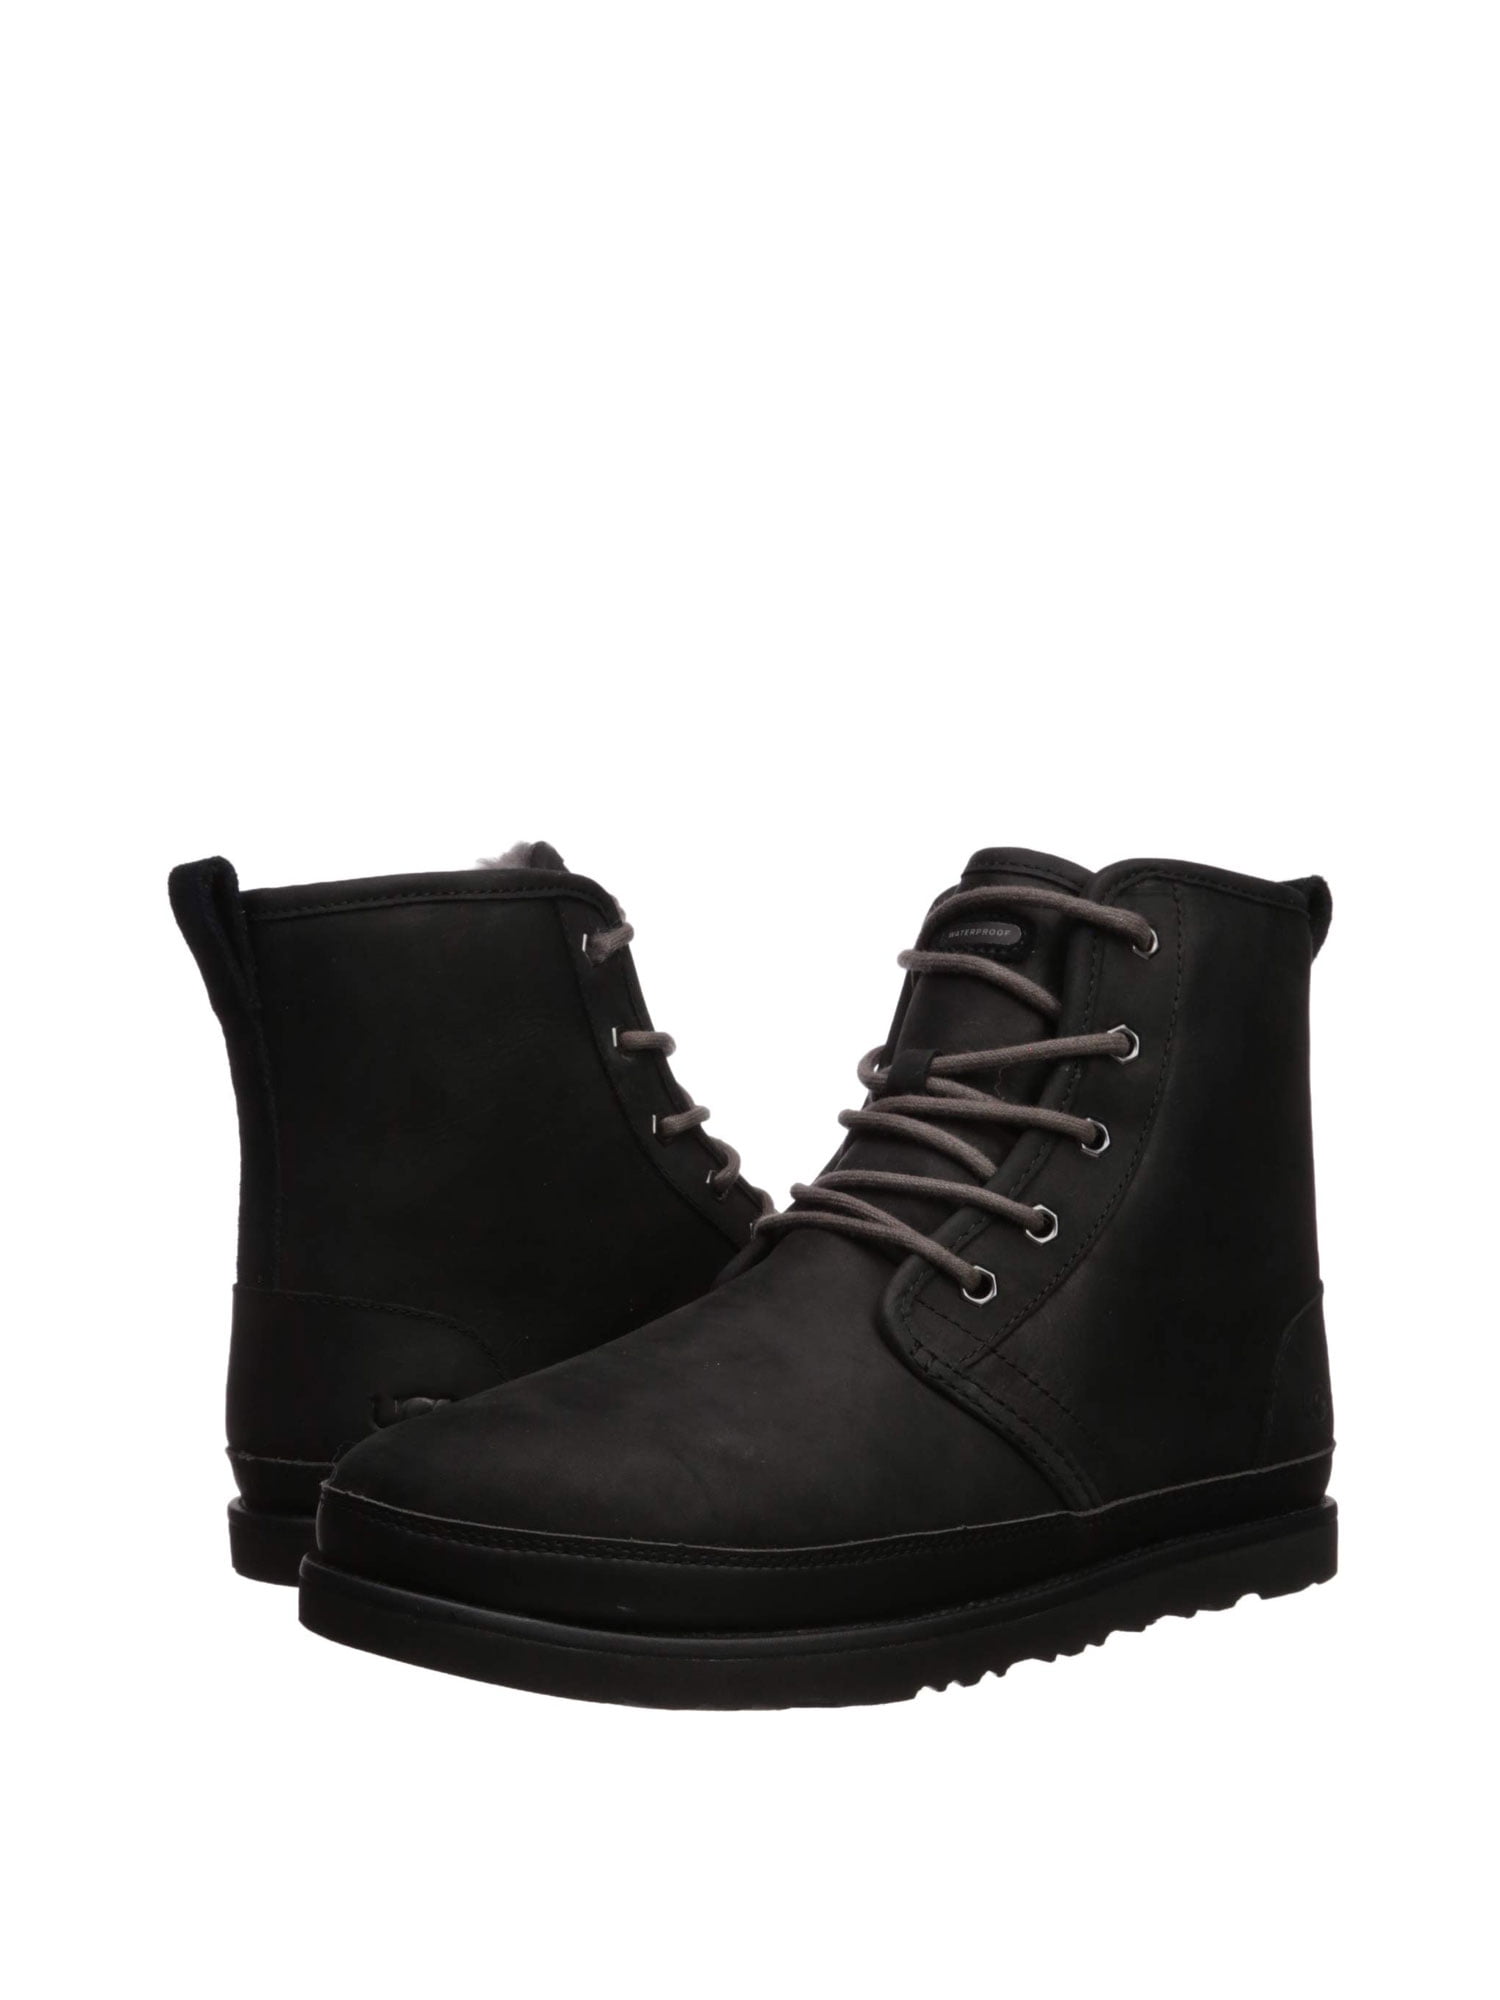 ugg ankle lace up boots